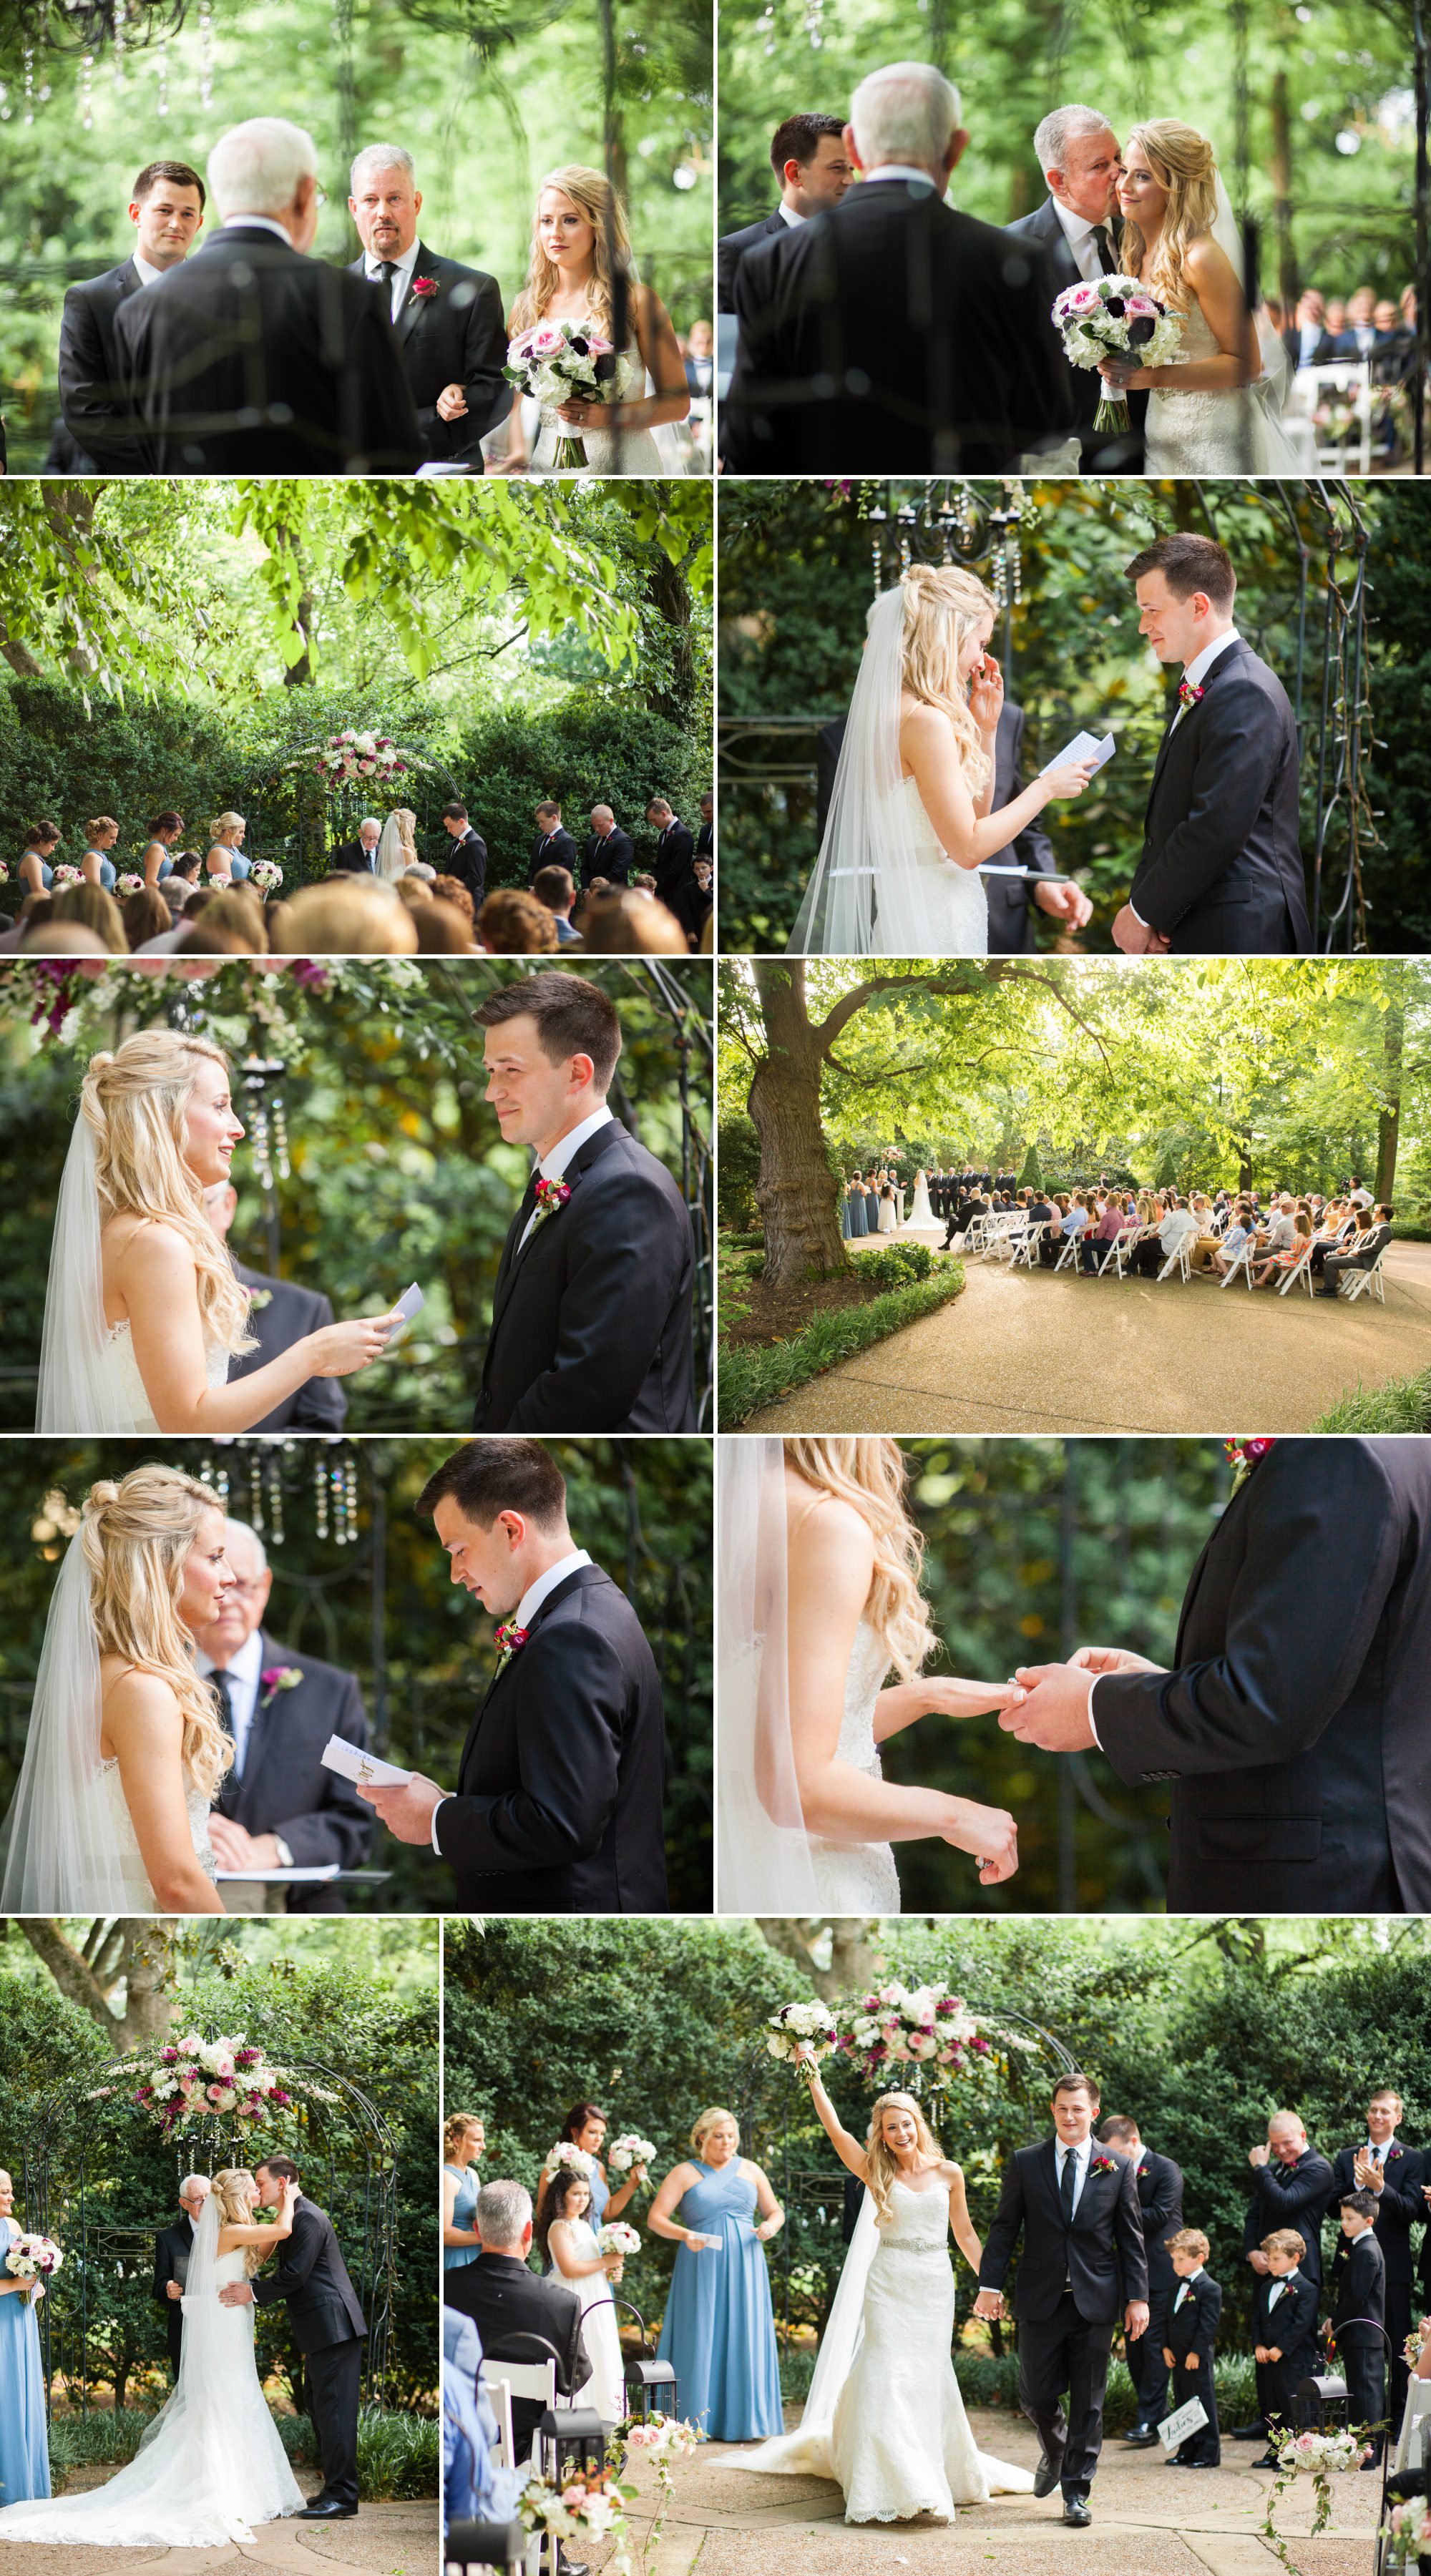 Wedding ceremony outside at Riverwood Mansion in Nashville, Tennessee. Photography by Krista Lee.